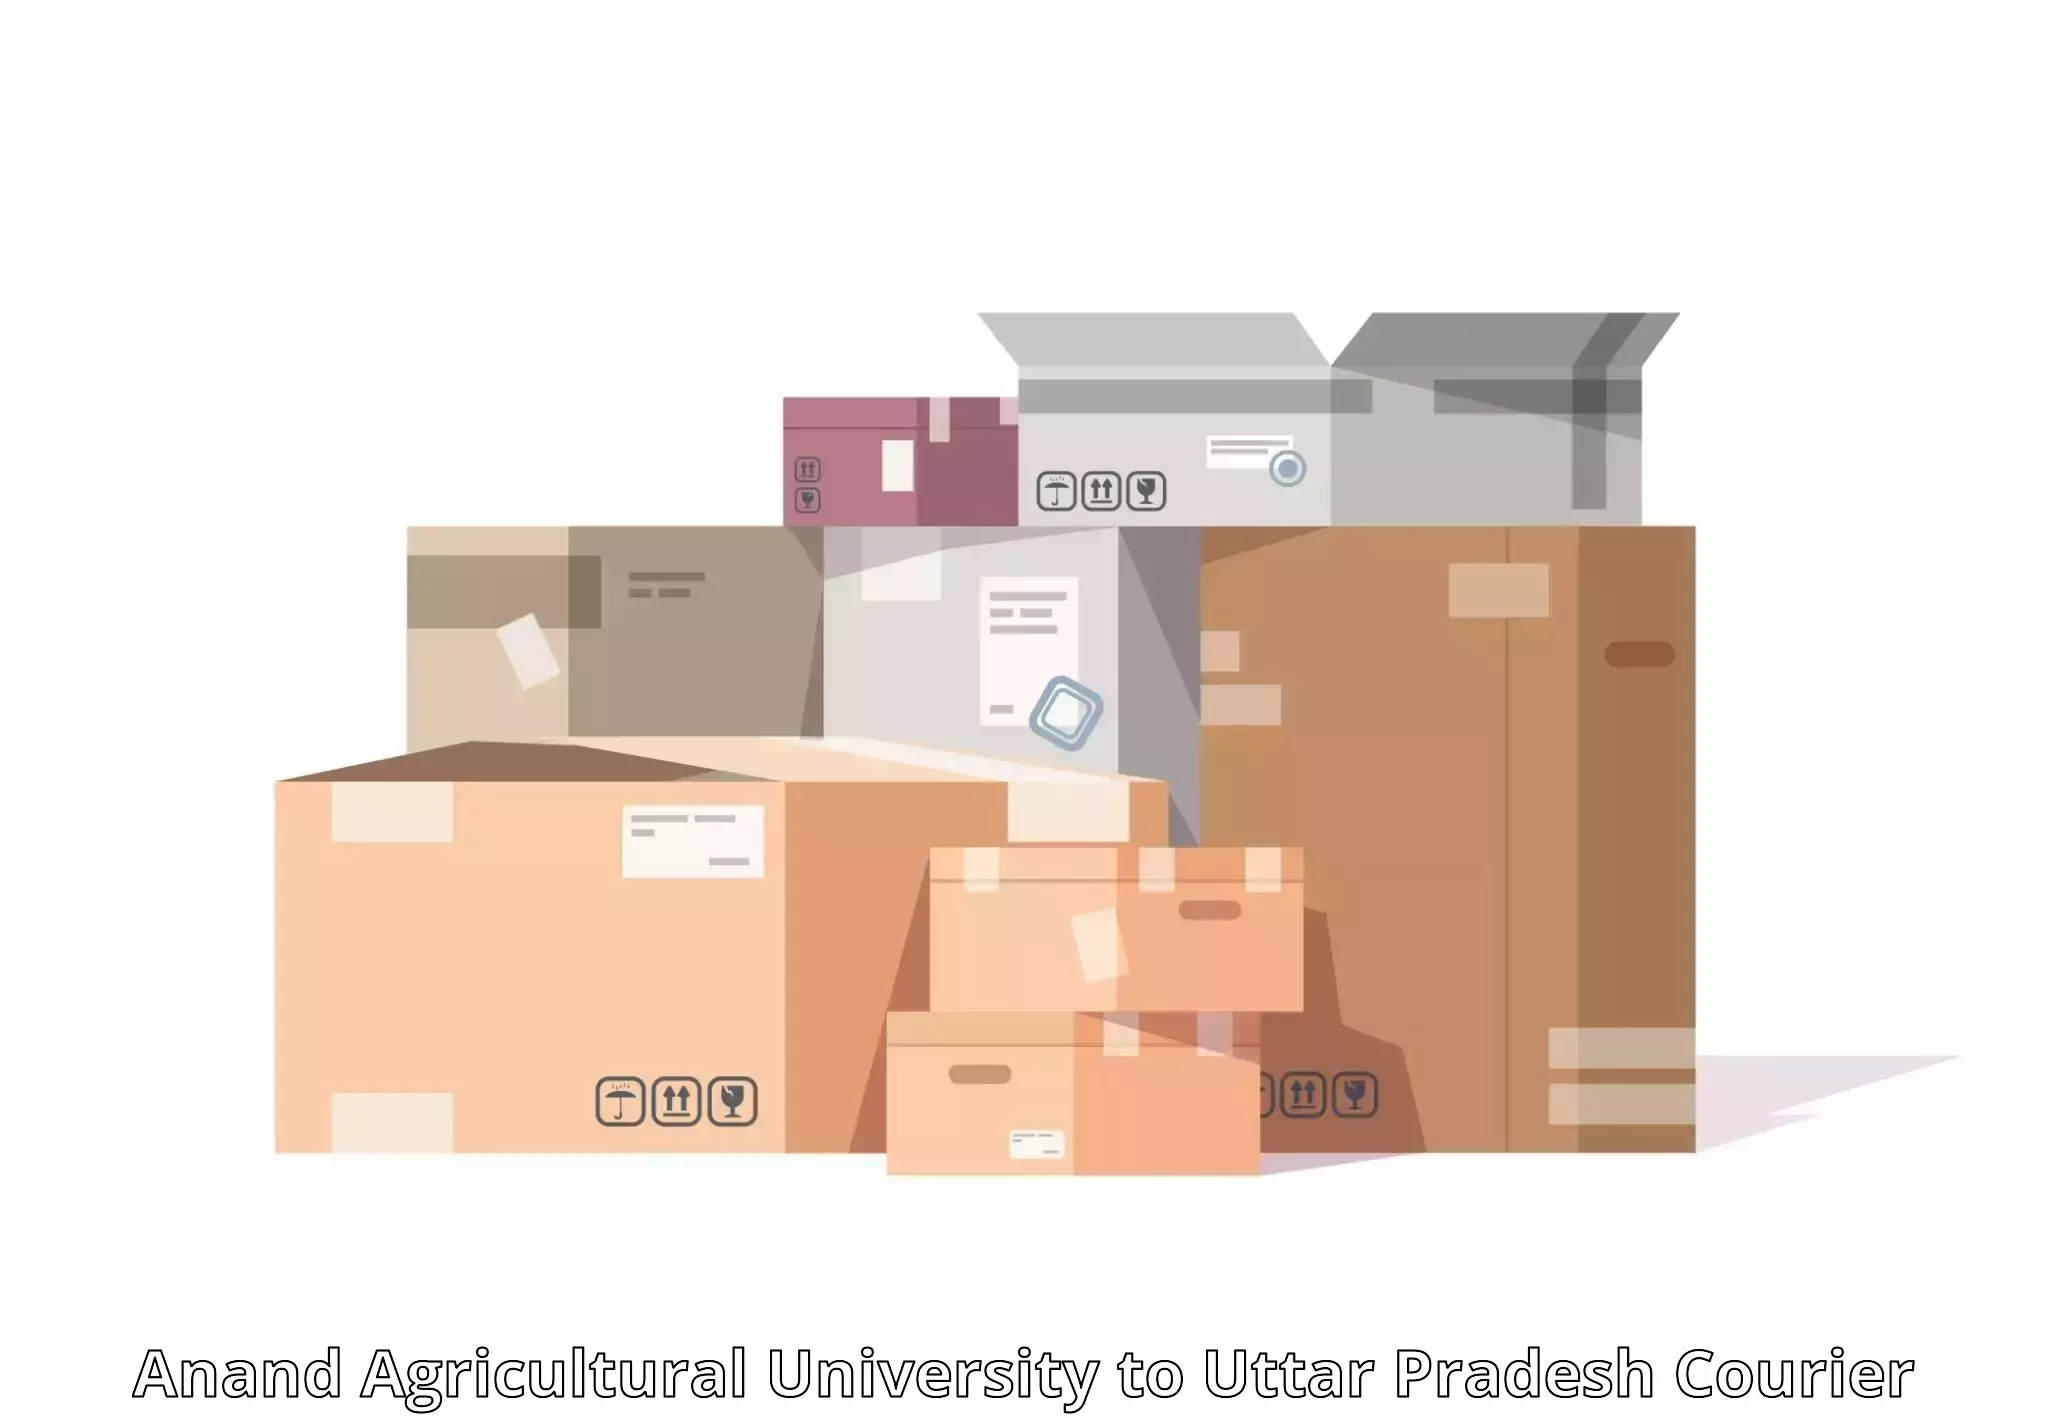 Supply chain delivery in Anand Agricultural University to Nichlaul